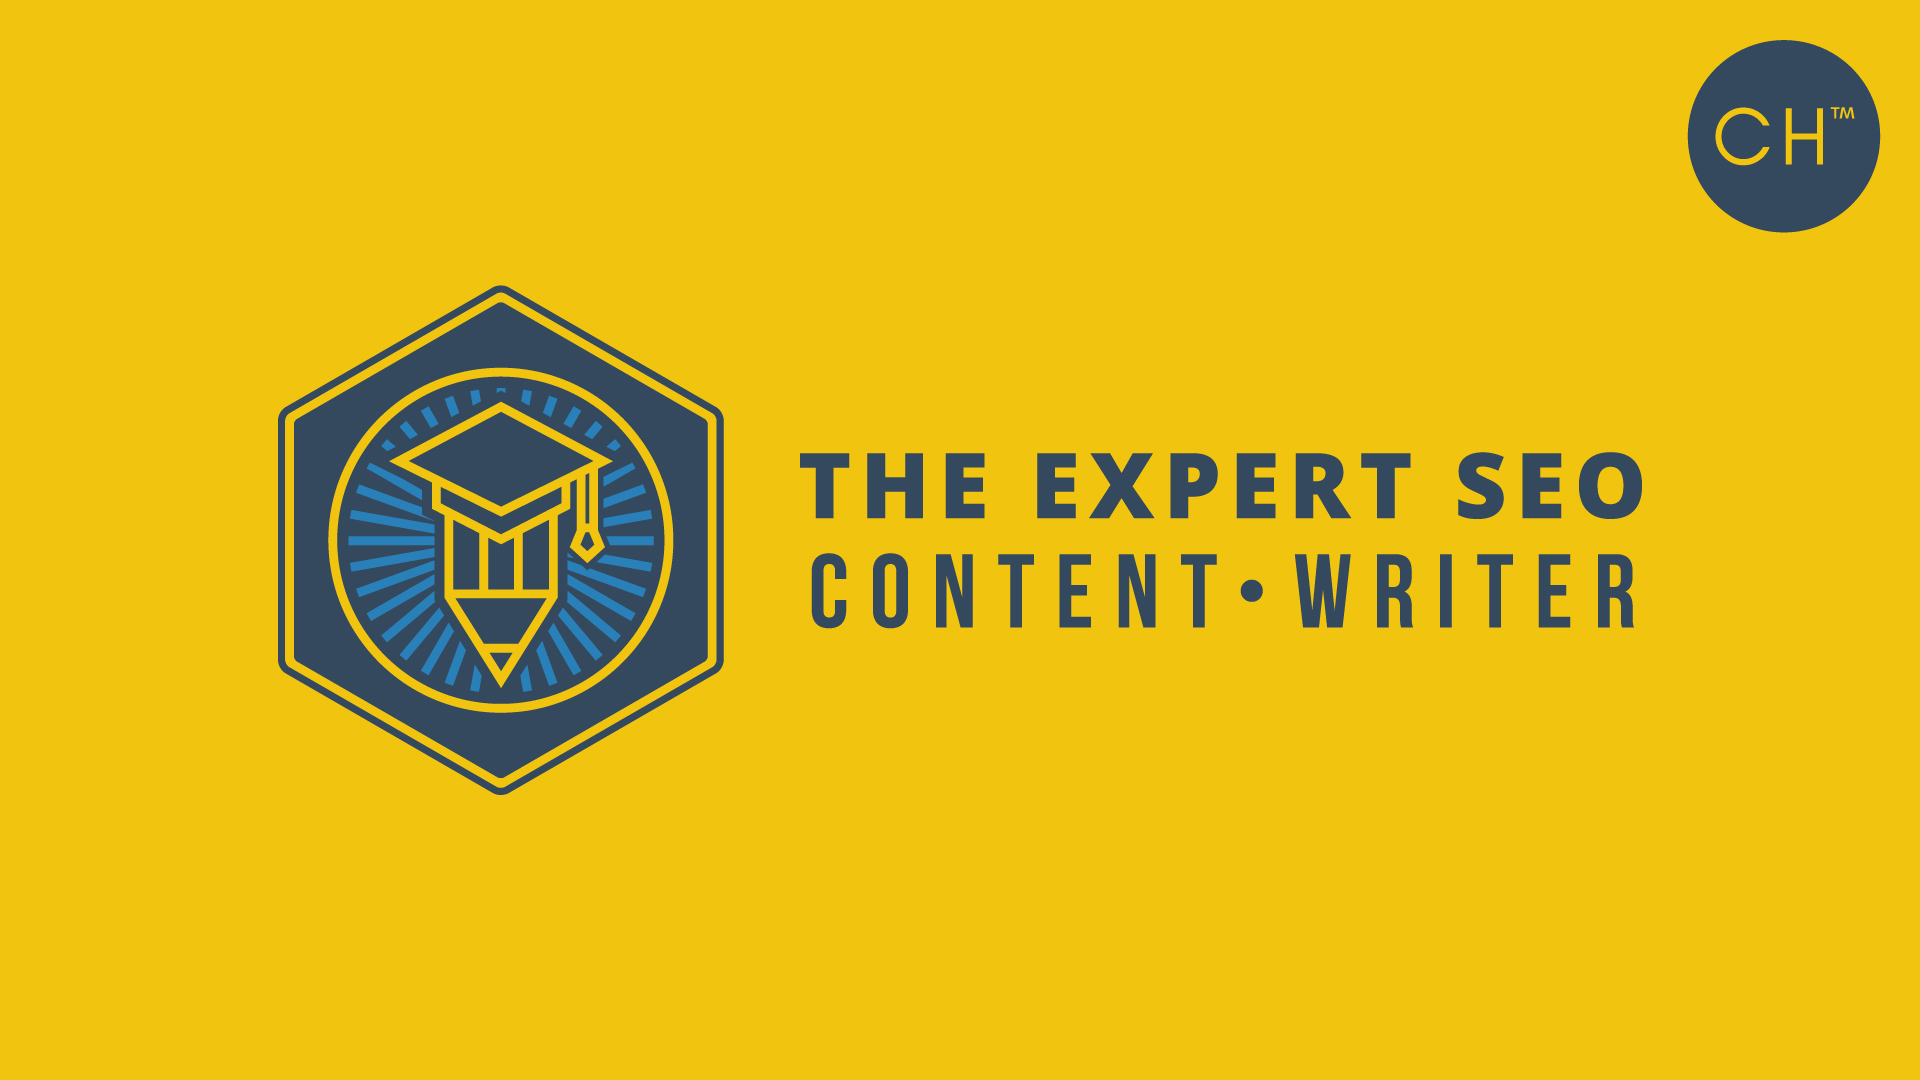 The Expert SEO Content Writer Course